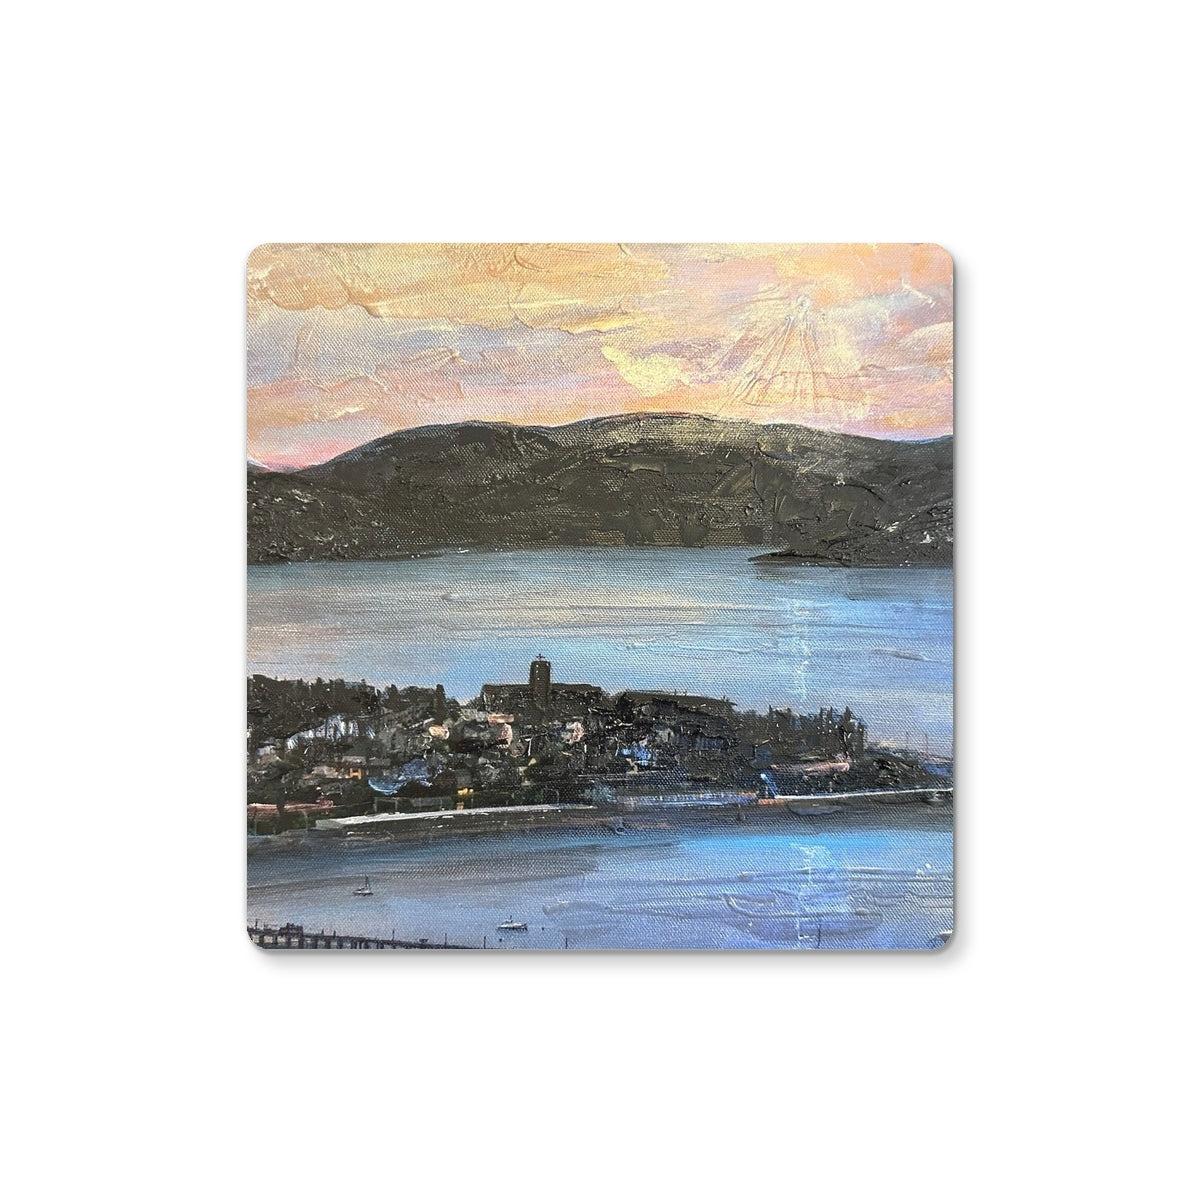 From Lyle Hill Art Gifts Coaster-Homeware-River Clyde Art Gallery-Single Coaster-Paintings, Prints, Homeware, Art Gifts From Scotland By Scottish Artist Kevin Hunter